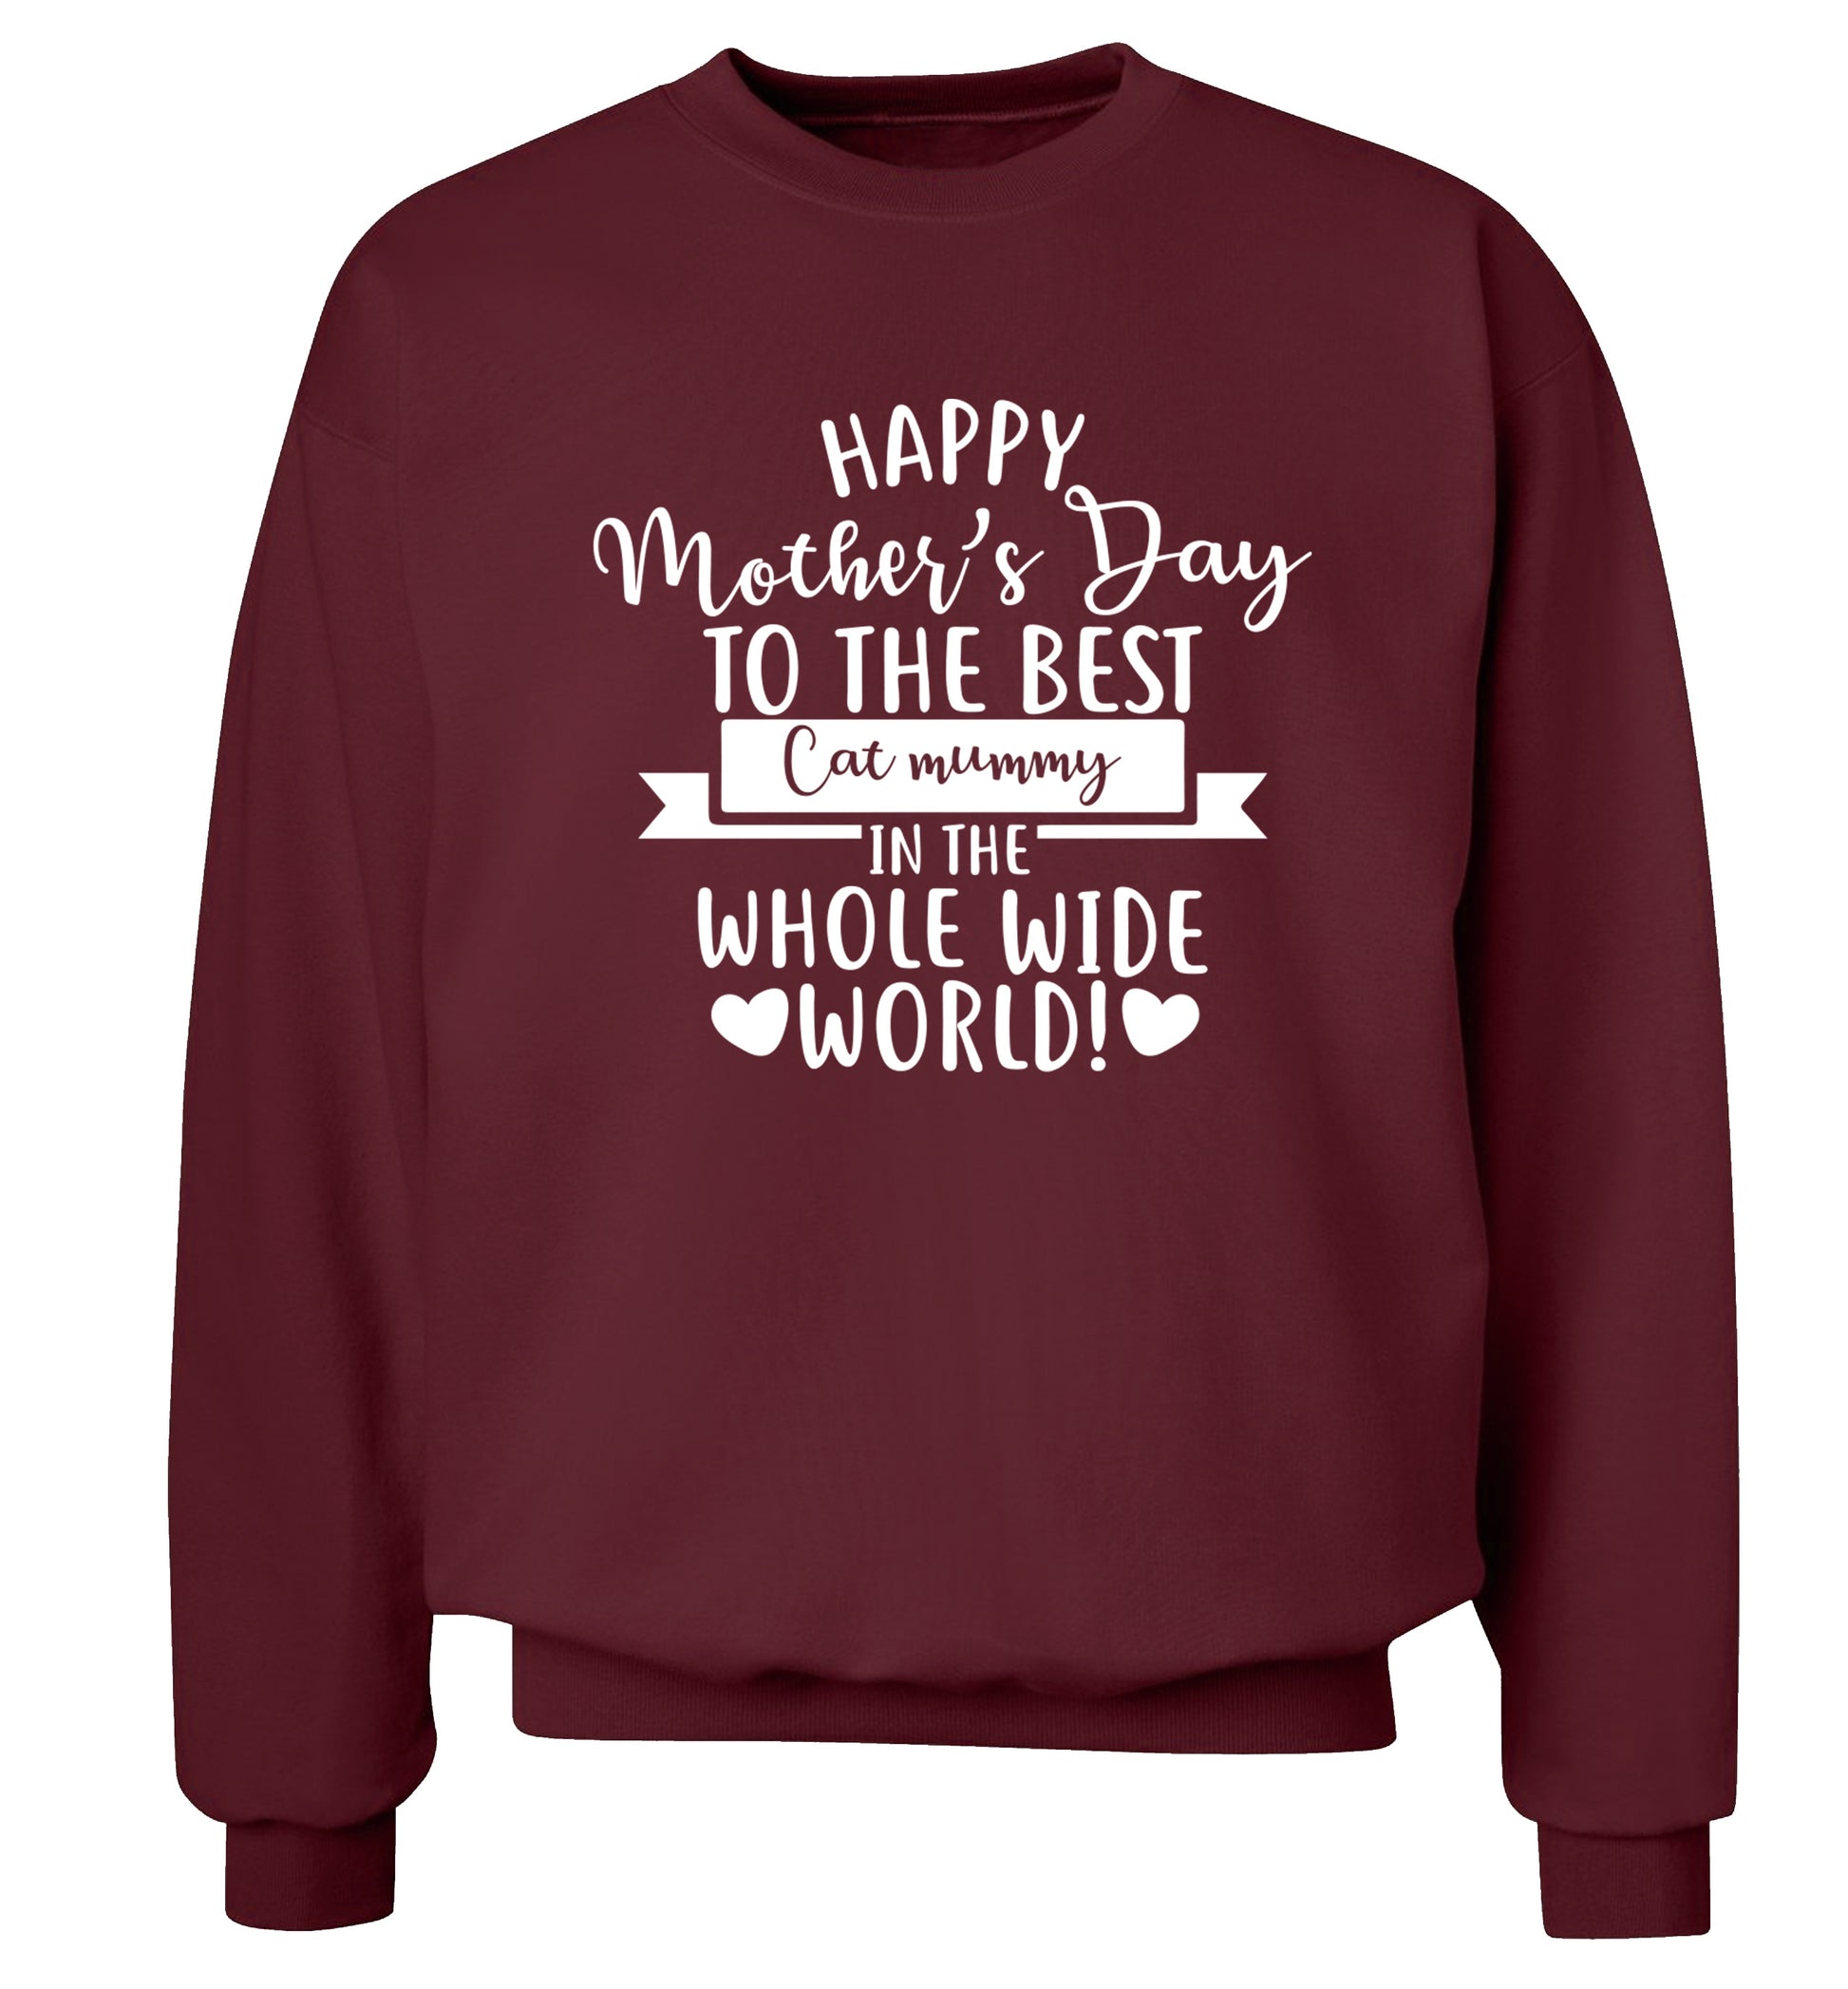 Happy mother's day to the best cat mummy in the world Adult's unisex maroon Sweater 2XL